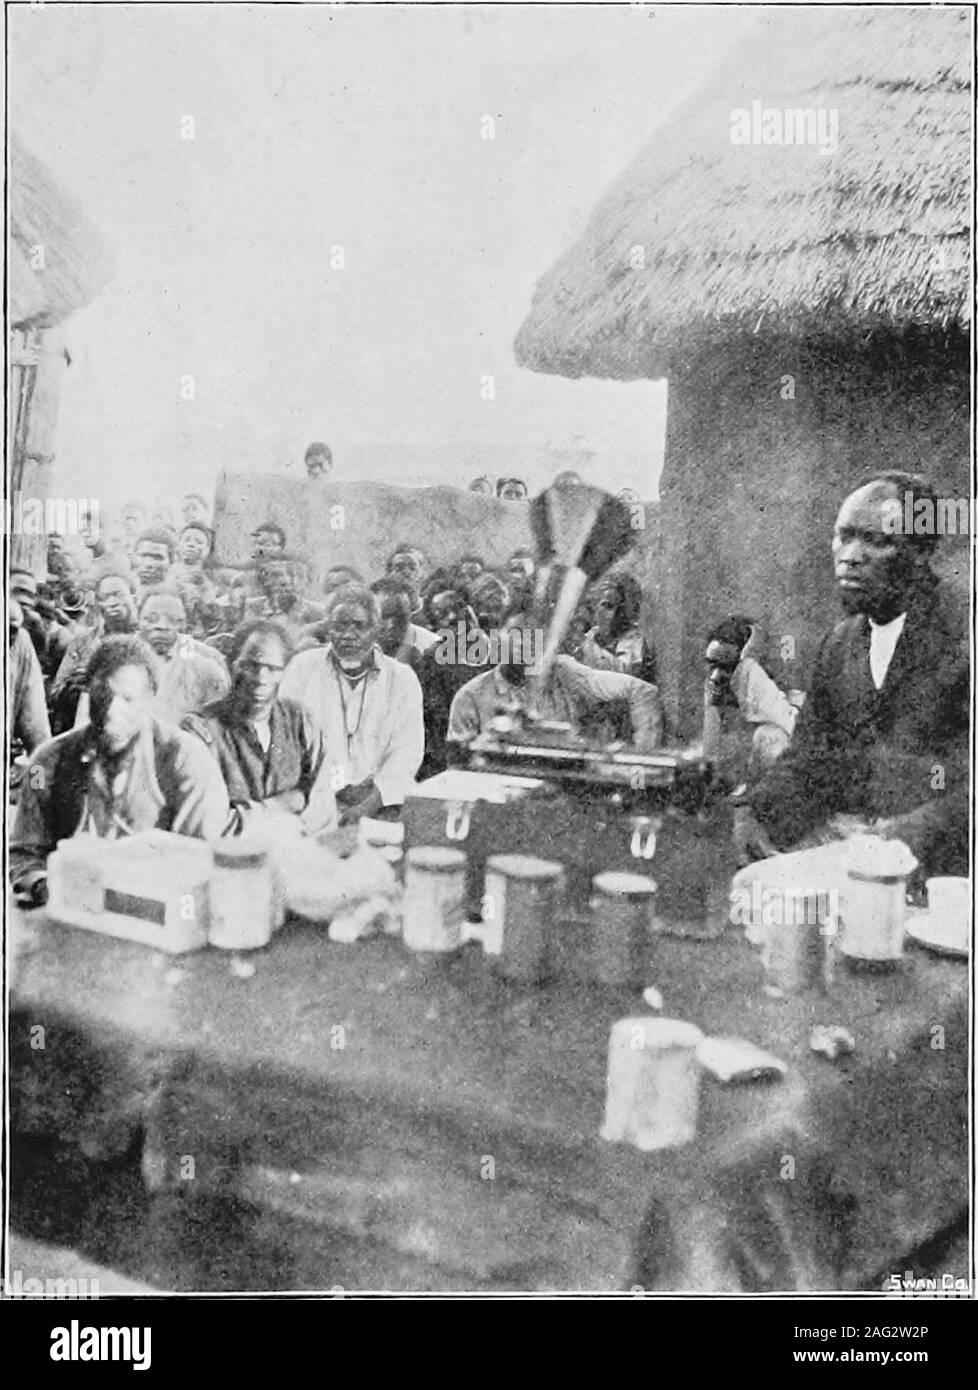 . In remotest Barotseland; being an account of a journey of over 8,000 miles through the wildest and remotest parts of Lewanika's empire. esident, Mr. Coryndon,and his party had started for England on leave,and we had taken charge in his place. lO CHAPTER II. Litia—His government—Views on Christianity of natives—Departure forKazungula—Mr. Coillard—Arrival at Sesheke—Sesheke missionaries—Sergeant Macaulay. LiTiA, the eldest son of Lewanika, and heir-apparent to the Barotse throne, paid me anofficial visit. He is a vi^ell-made man of some twenty-fiveor thirty summers. He arrived carefully dresse Stock Photo